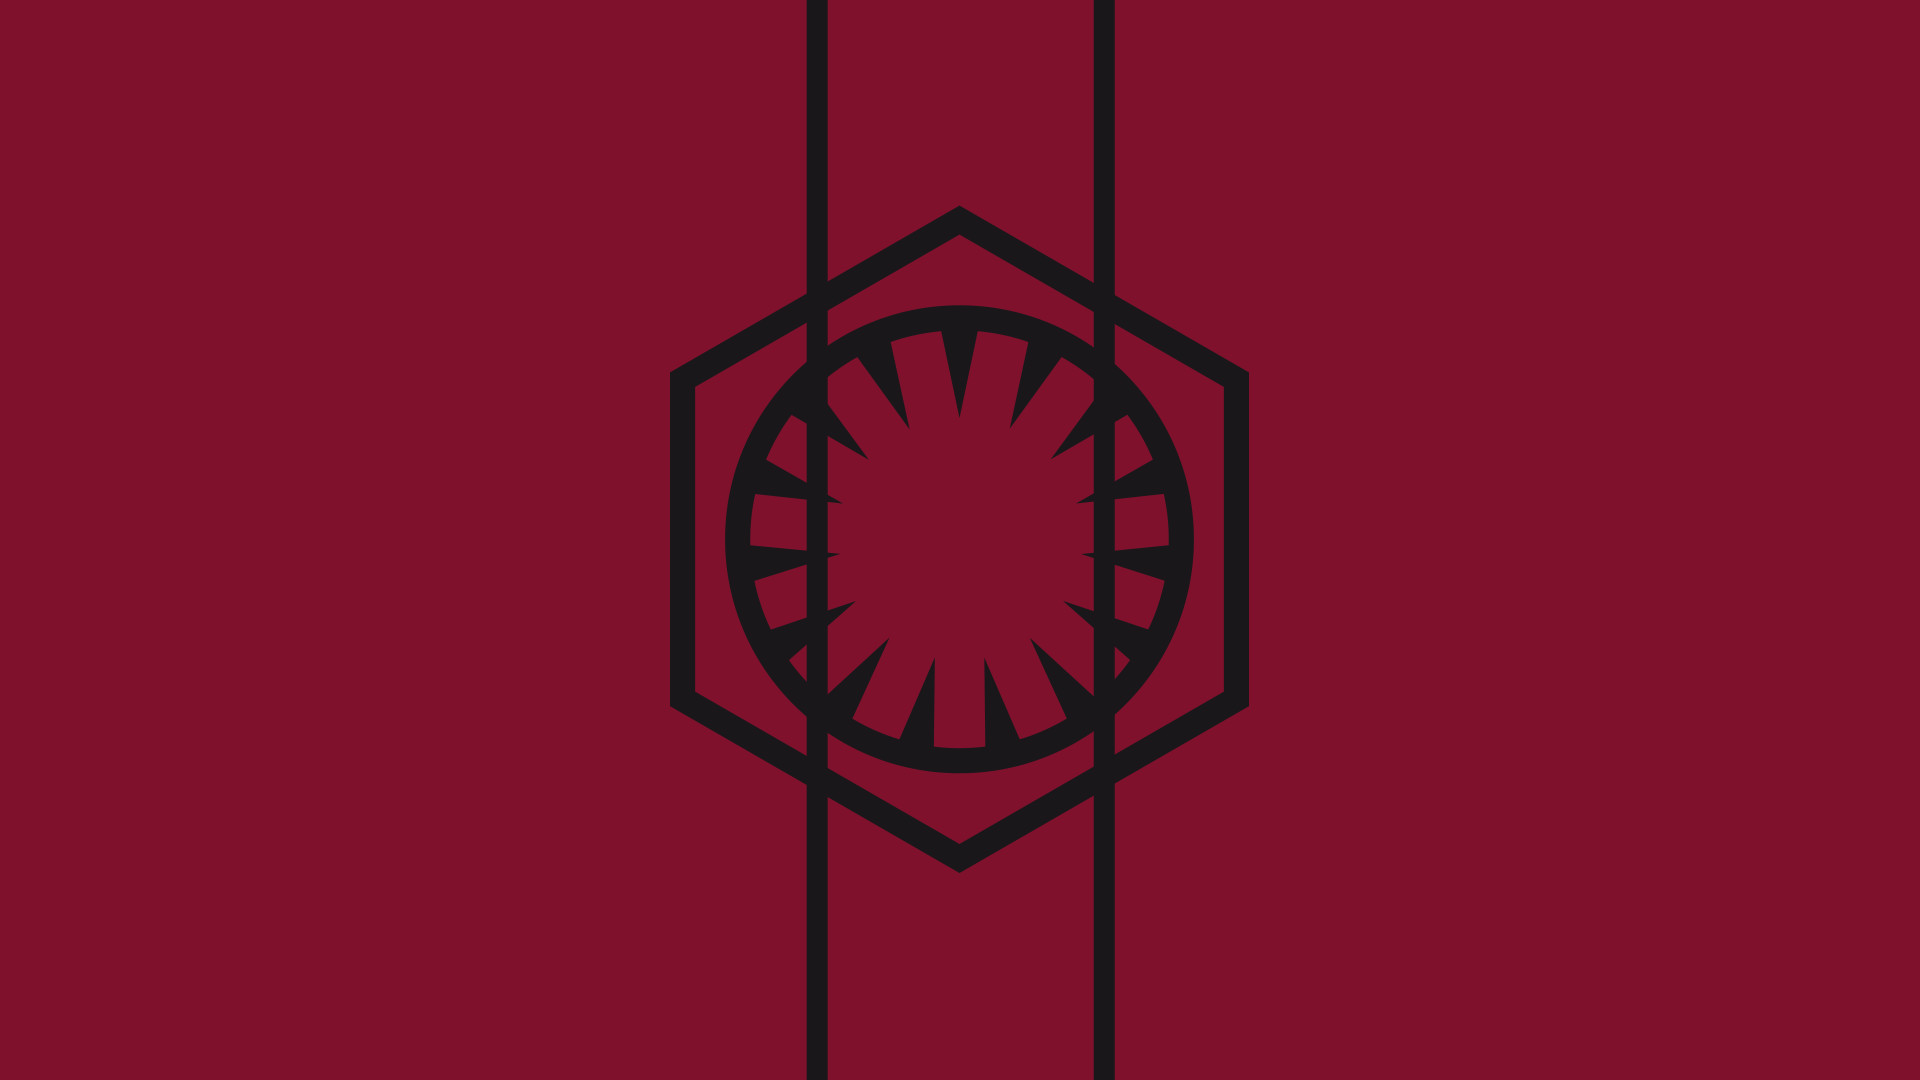 Made that new Imperial crest into a wallpaper. 1920×1080 other resolutions upon request